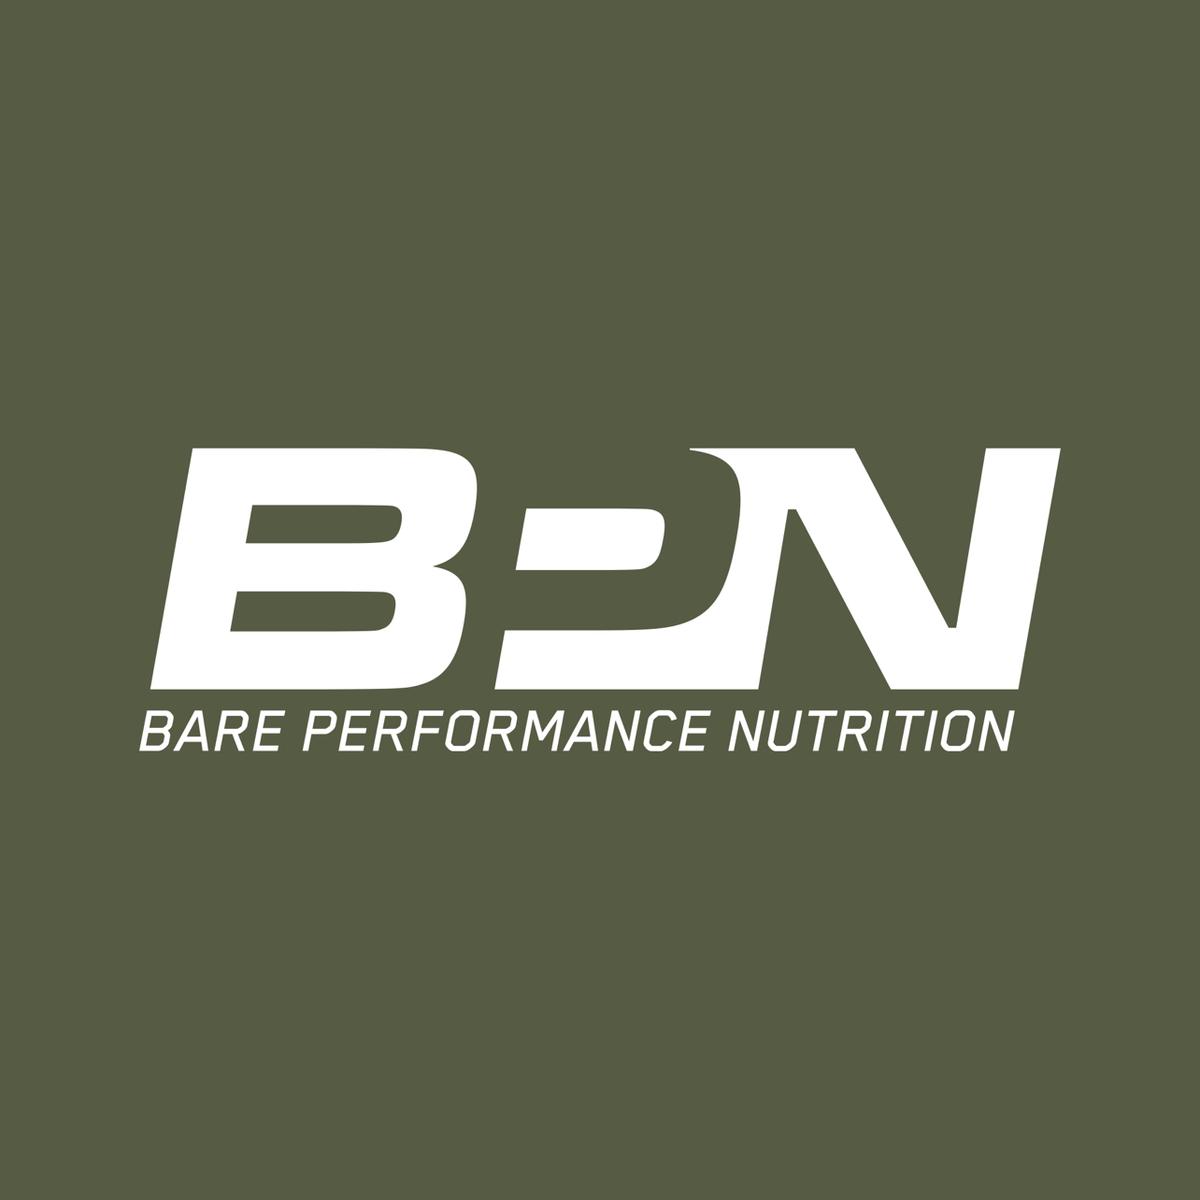 BPNSupps's images